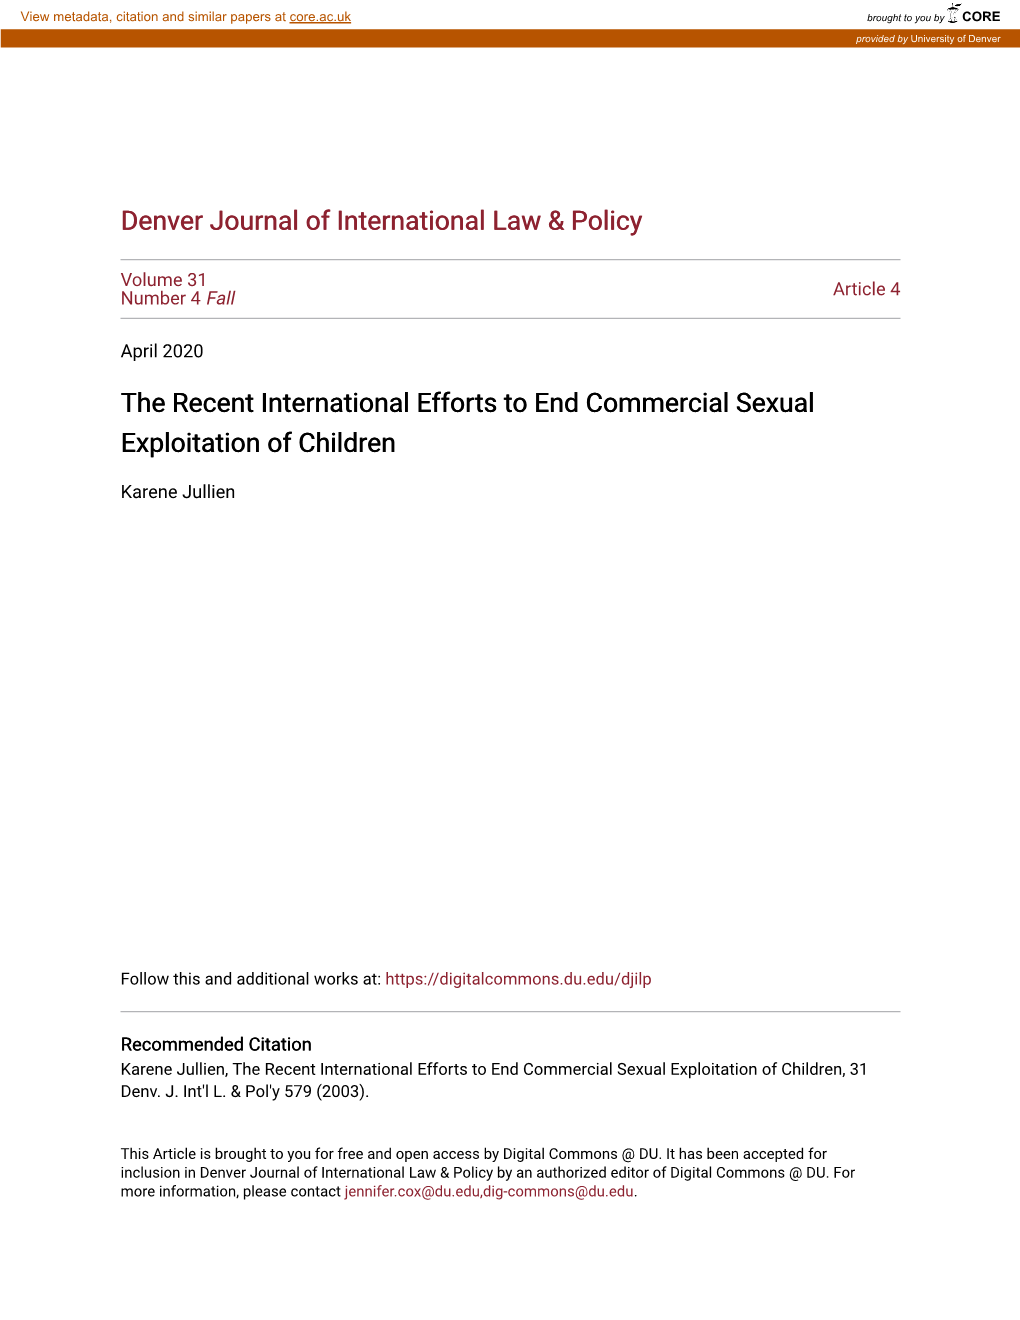 The Recent International Efforts to End Commercial Sexual Exploitation of Children